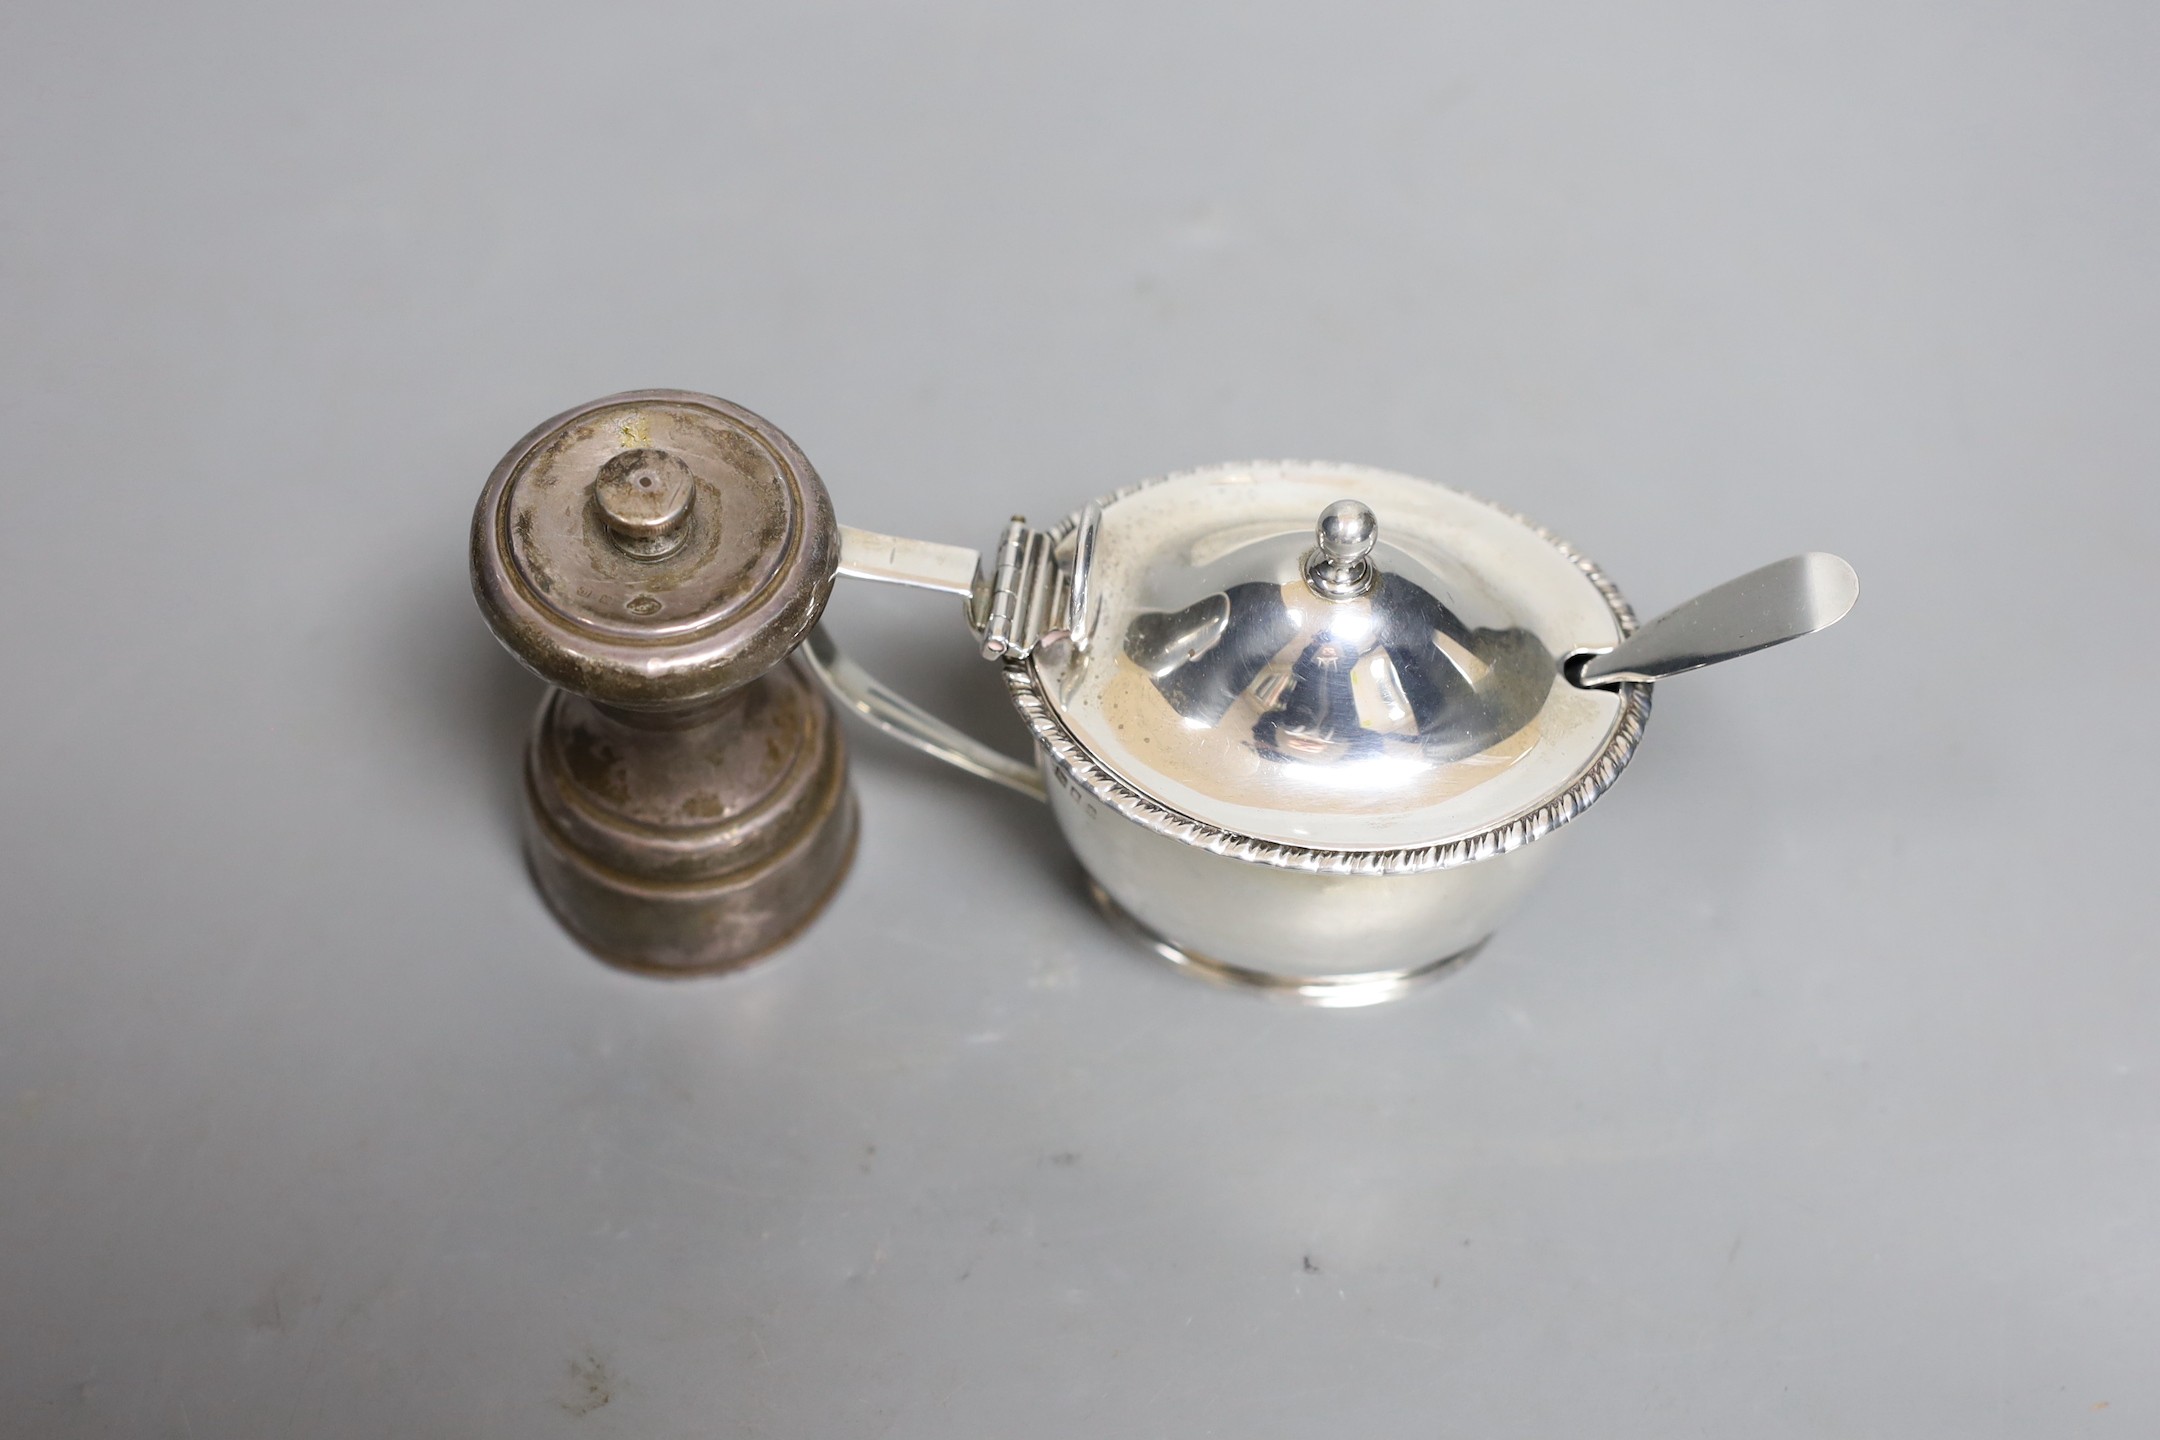 A George V silver mounted pepper mill, Birmingham, 1911, 80mm and a similar silver mustard pot.